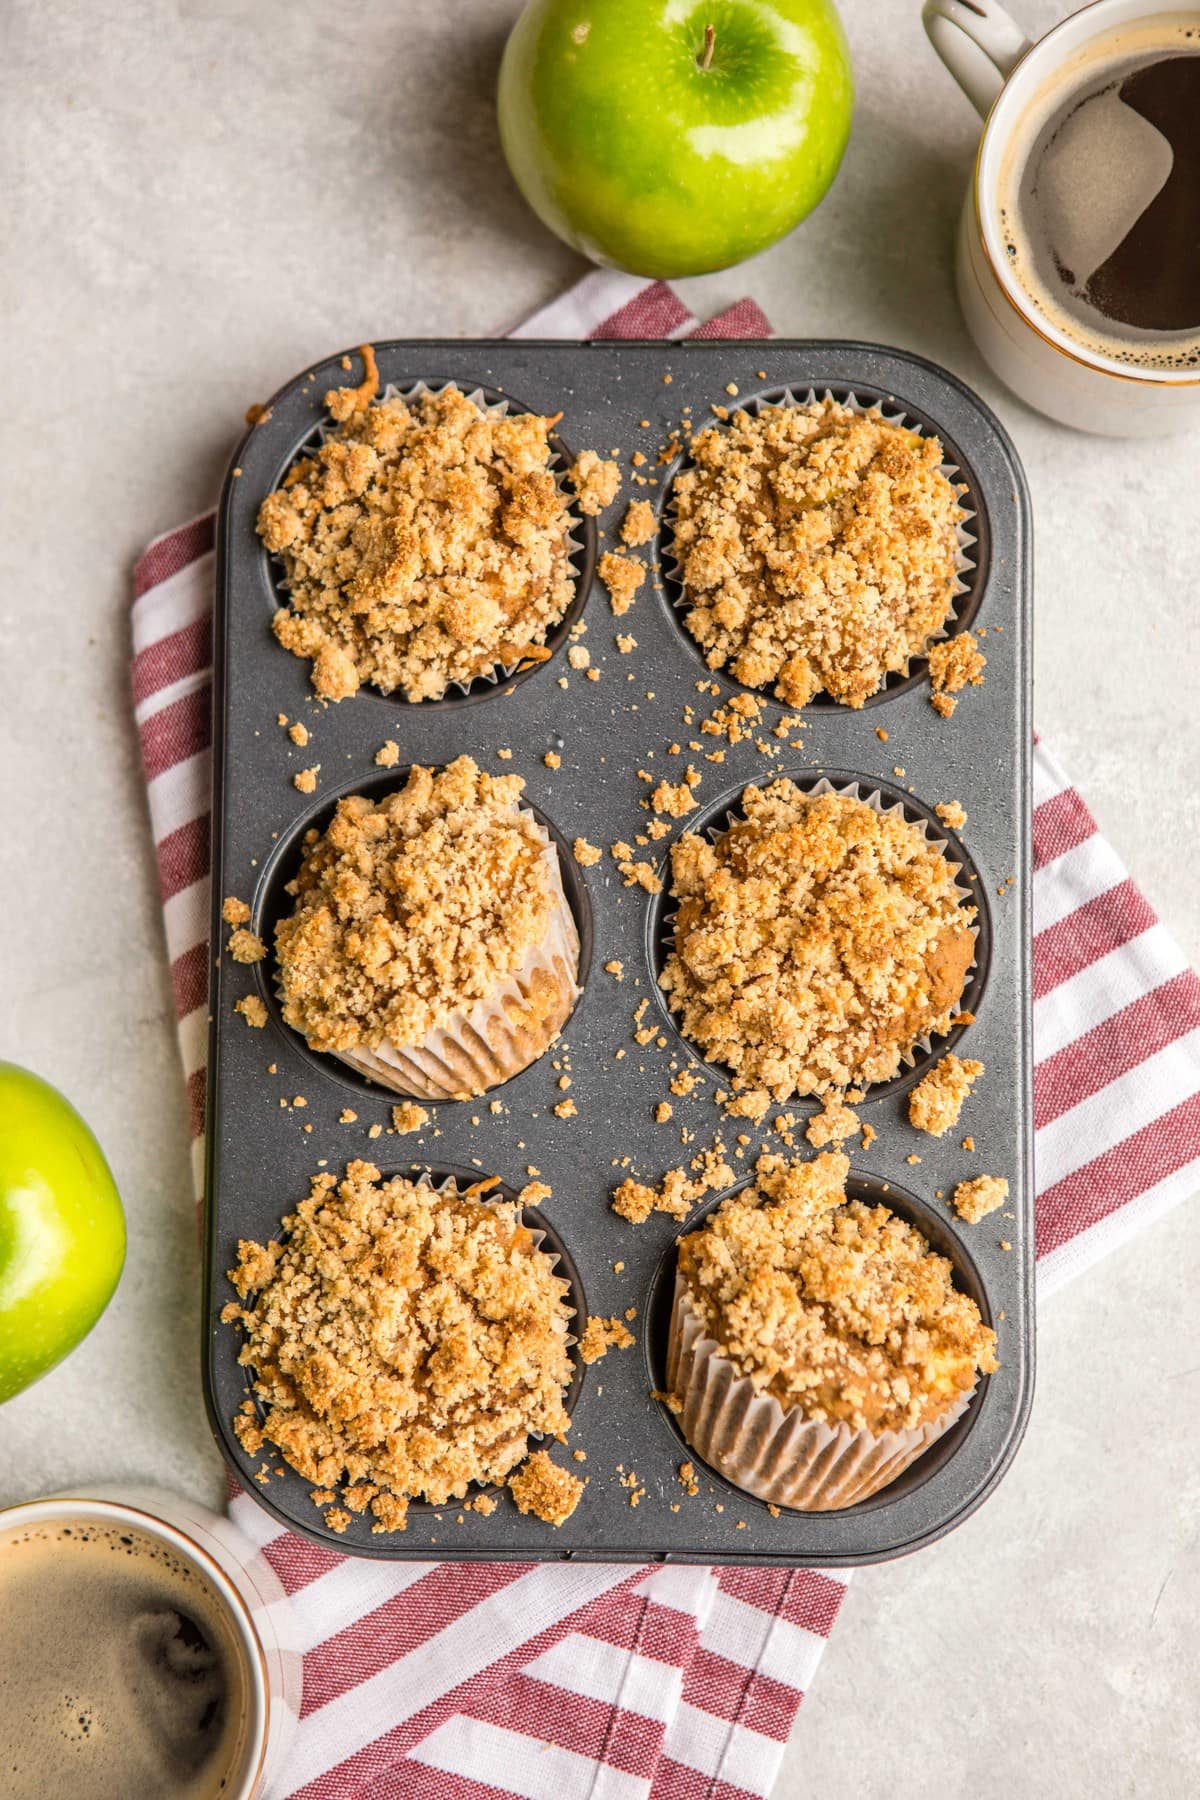 tray of baked apple cinnamon muffins with cups of coffee and fresh apples on light gray background